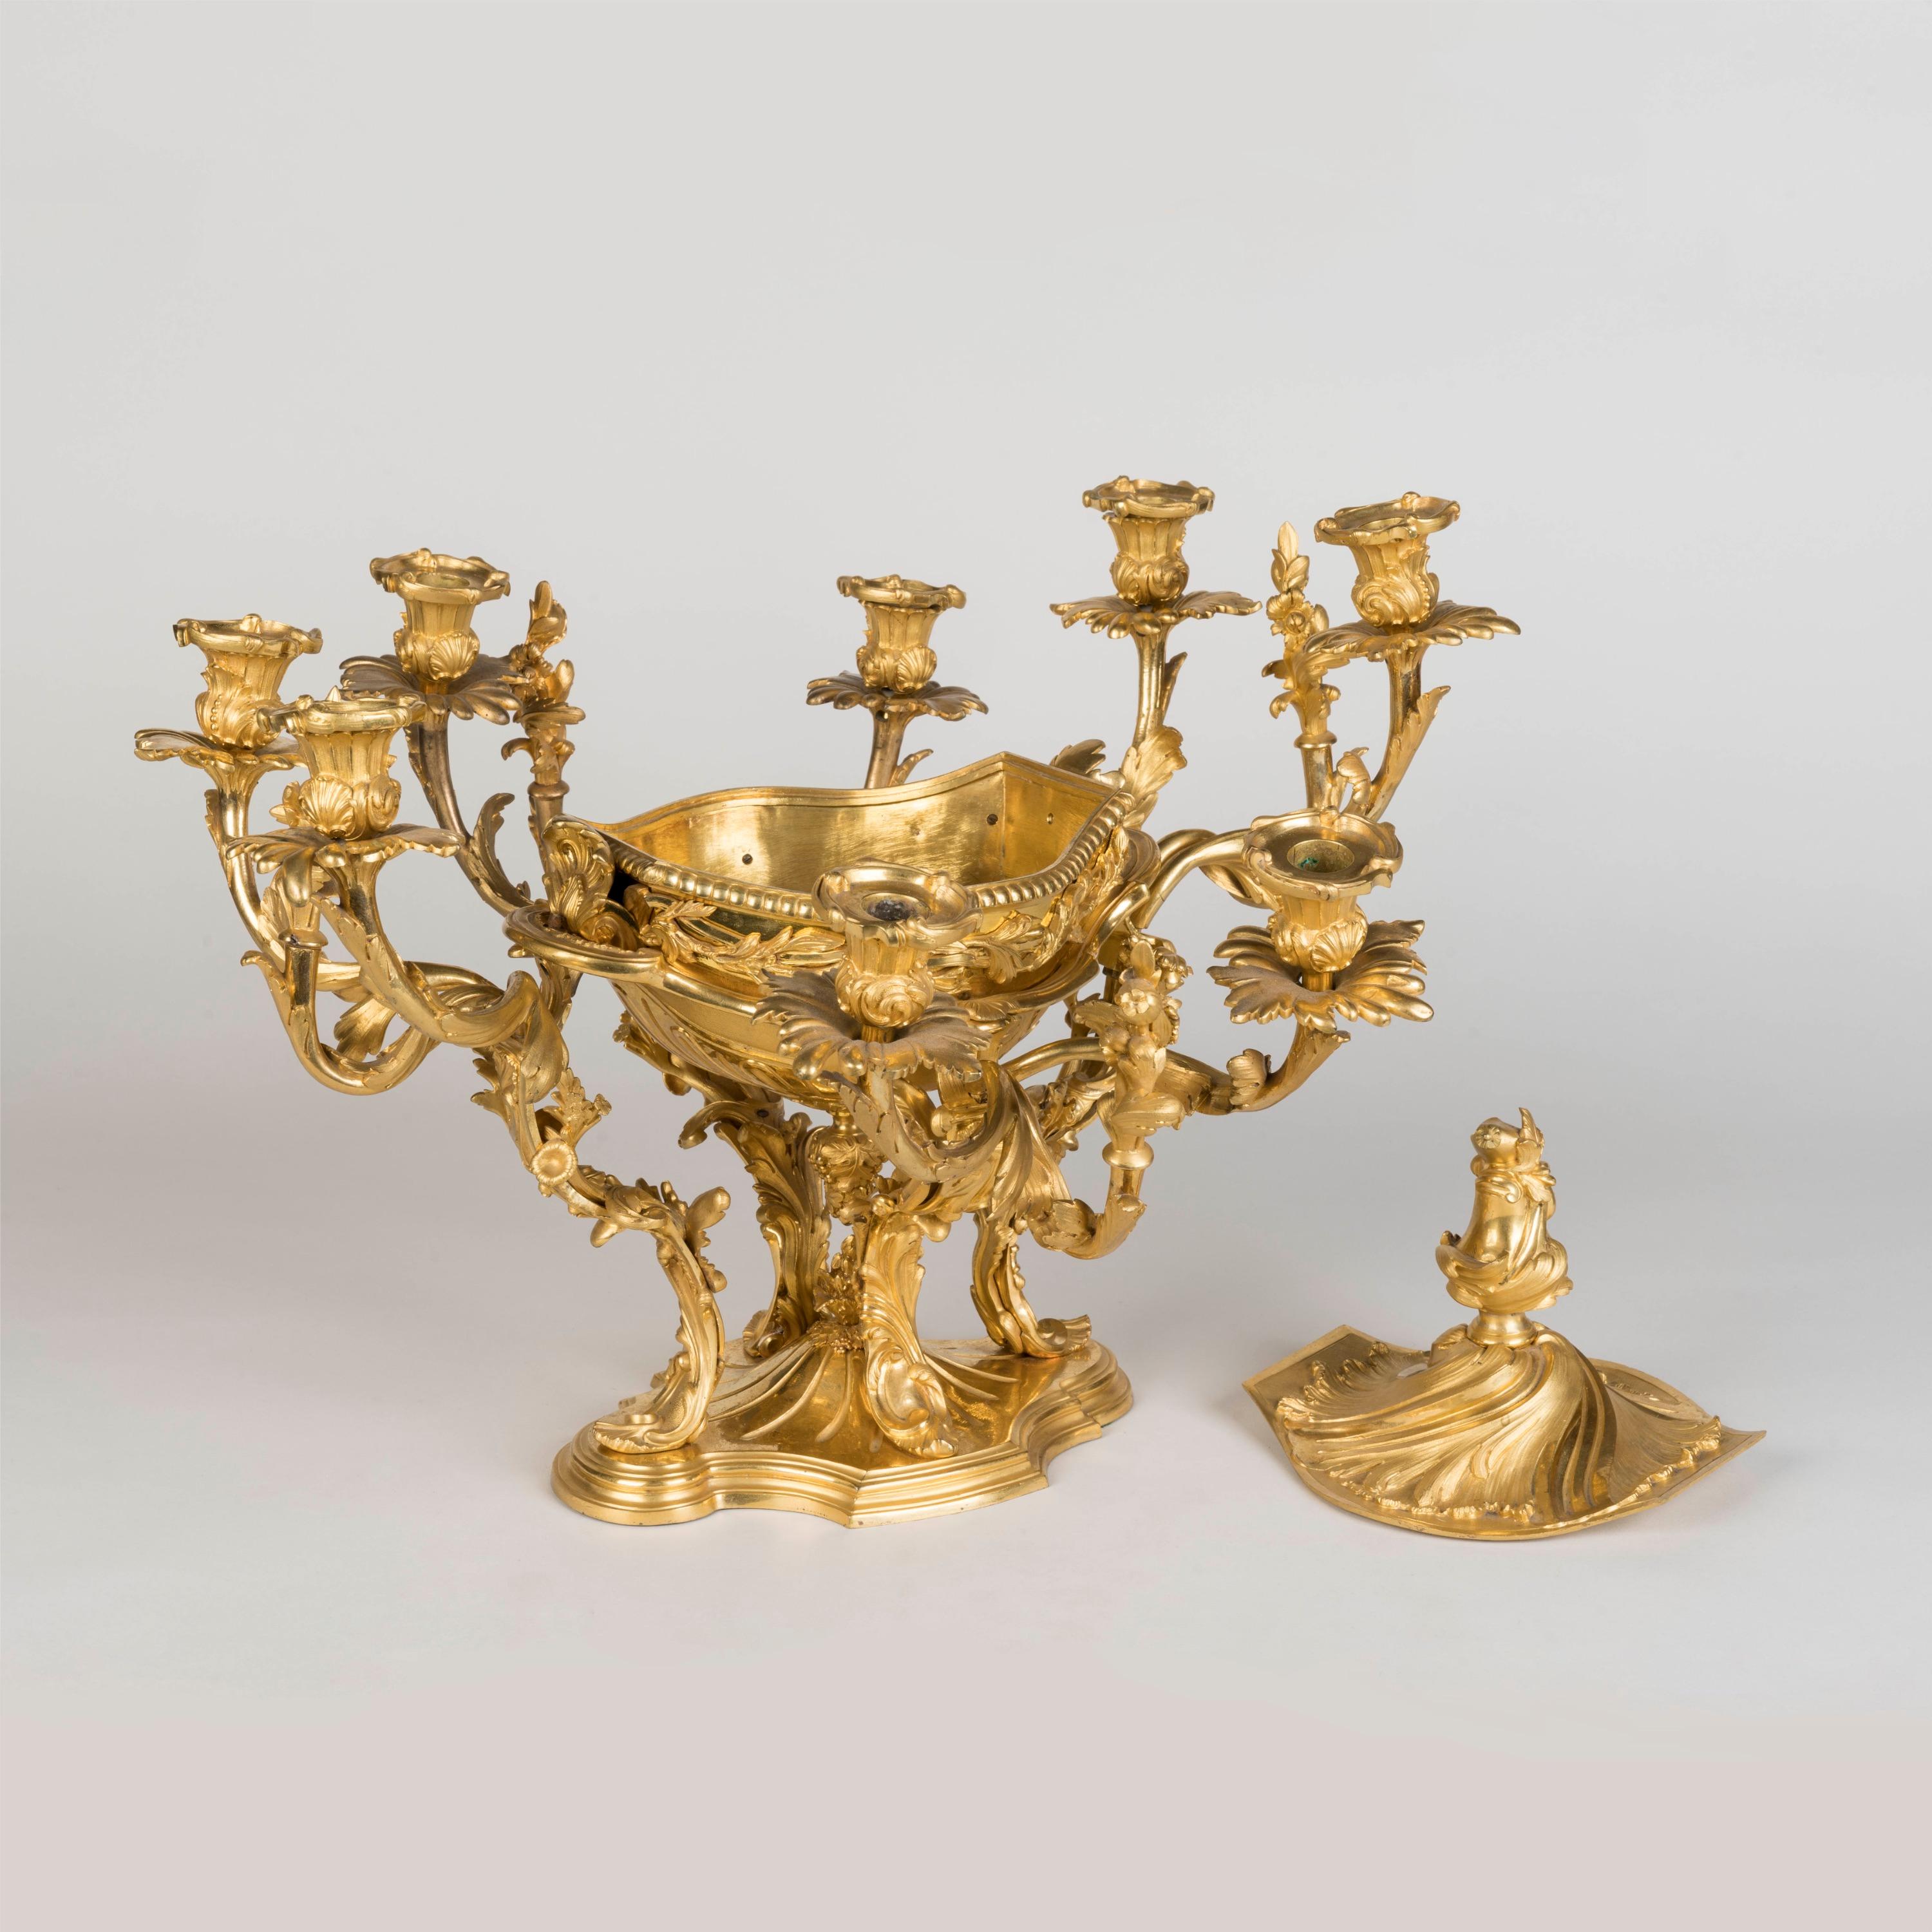 19th Century French Gilded Bronze Rococo Centrepiece In Good Condition For Sale In London, GB